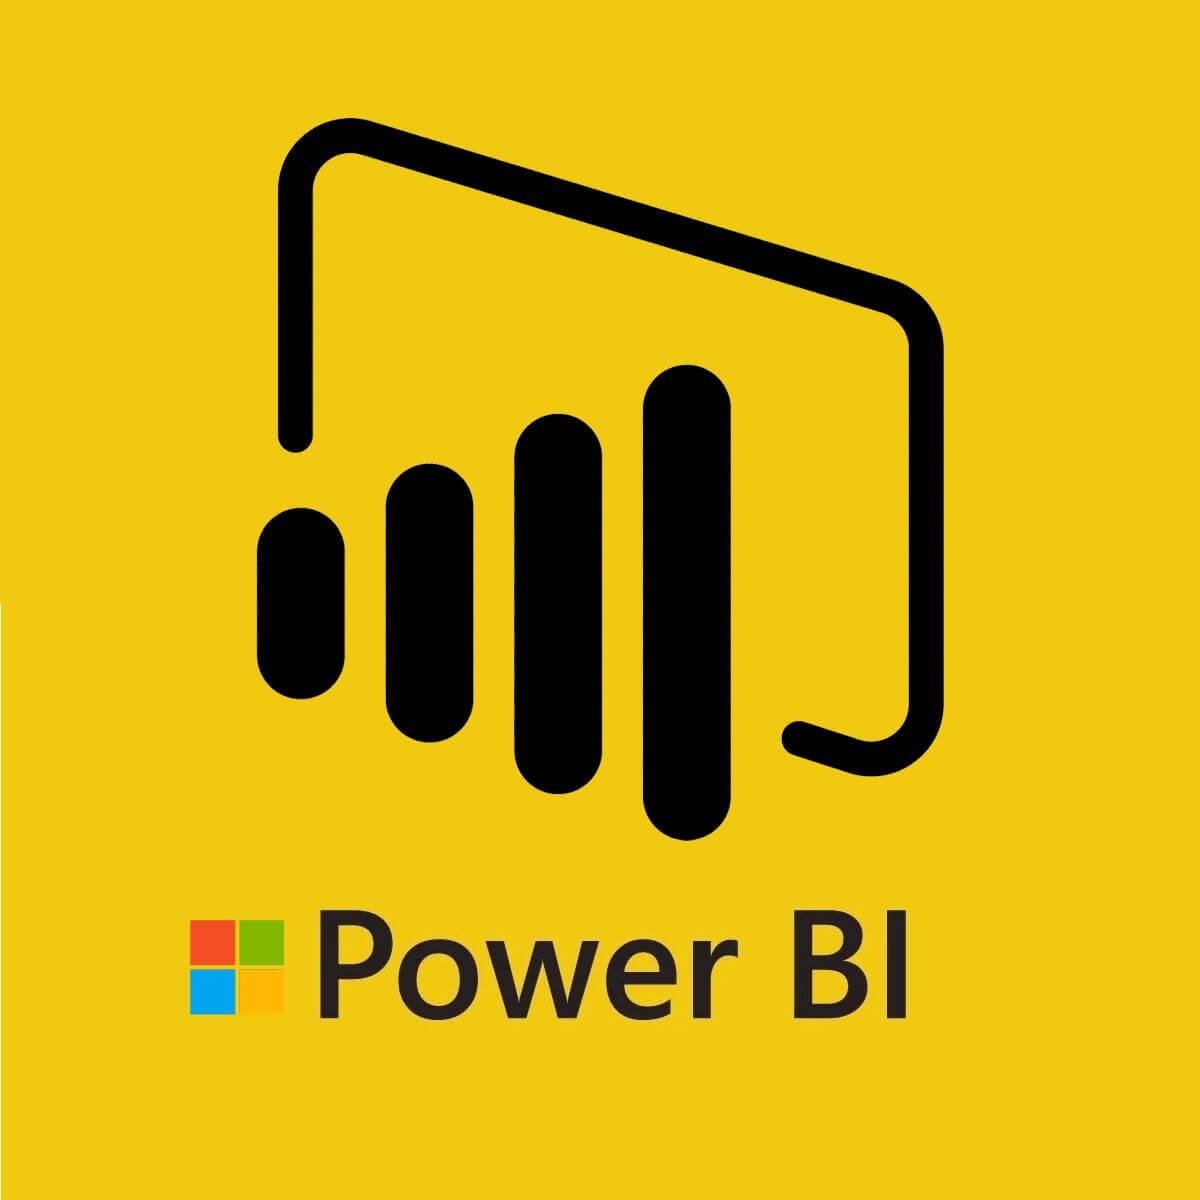 Power BI's August update brings grouping and template features